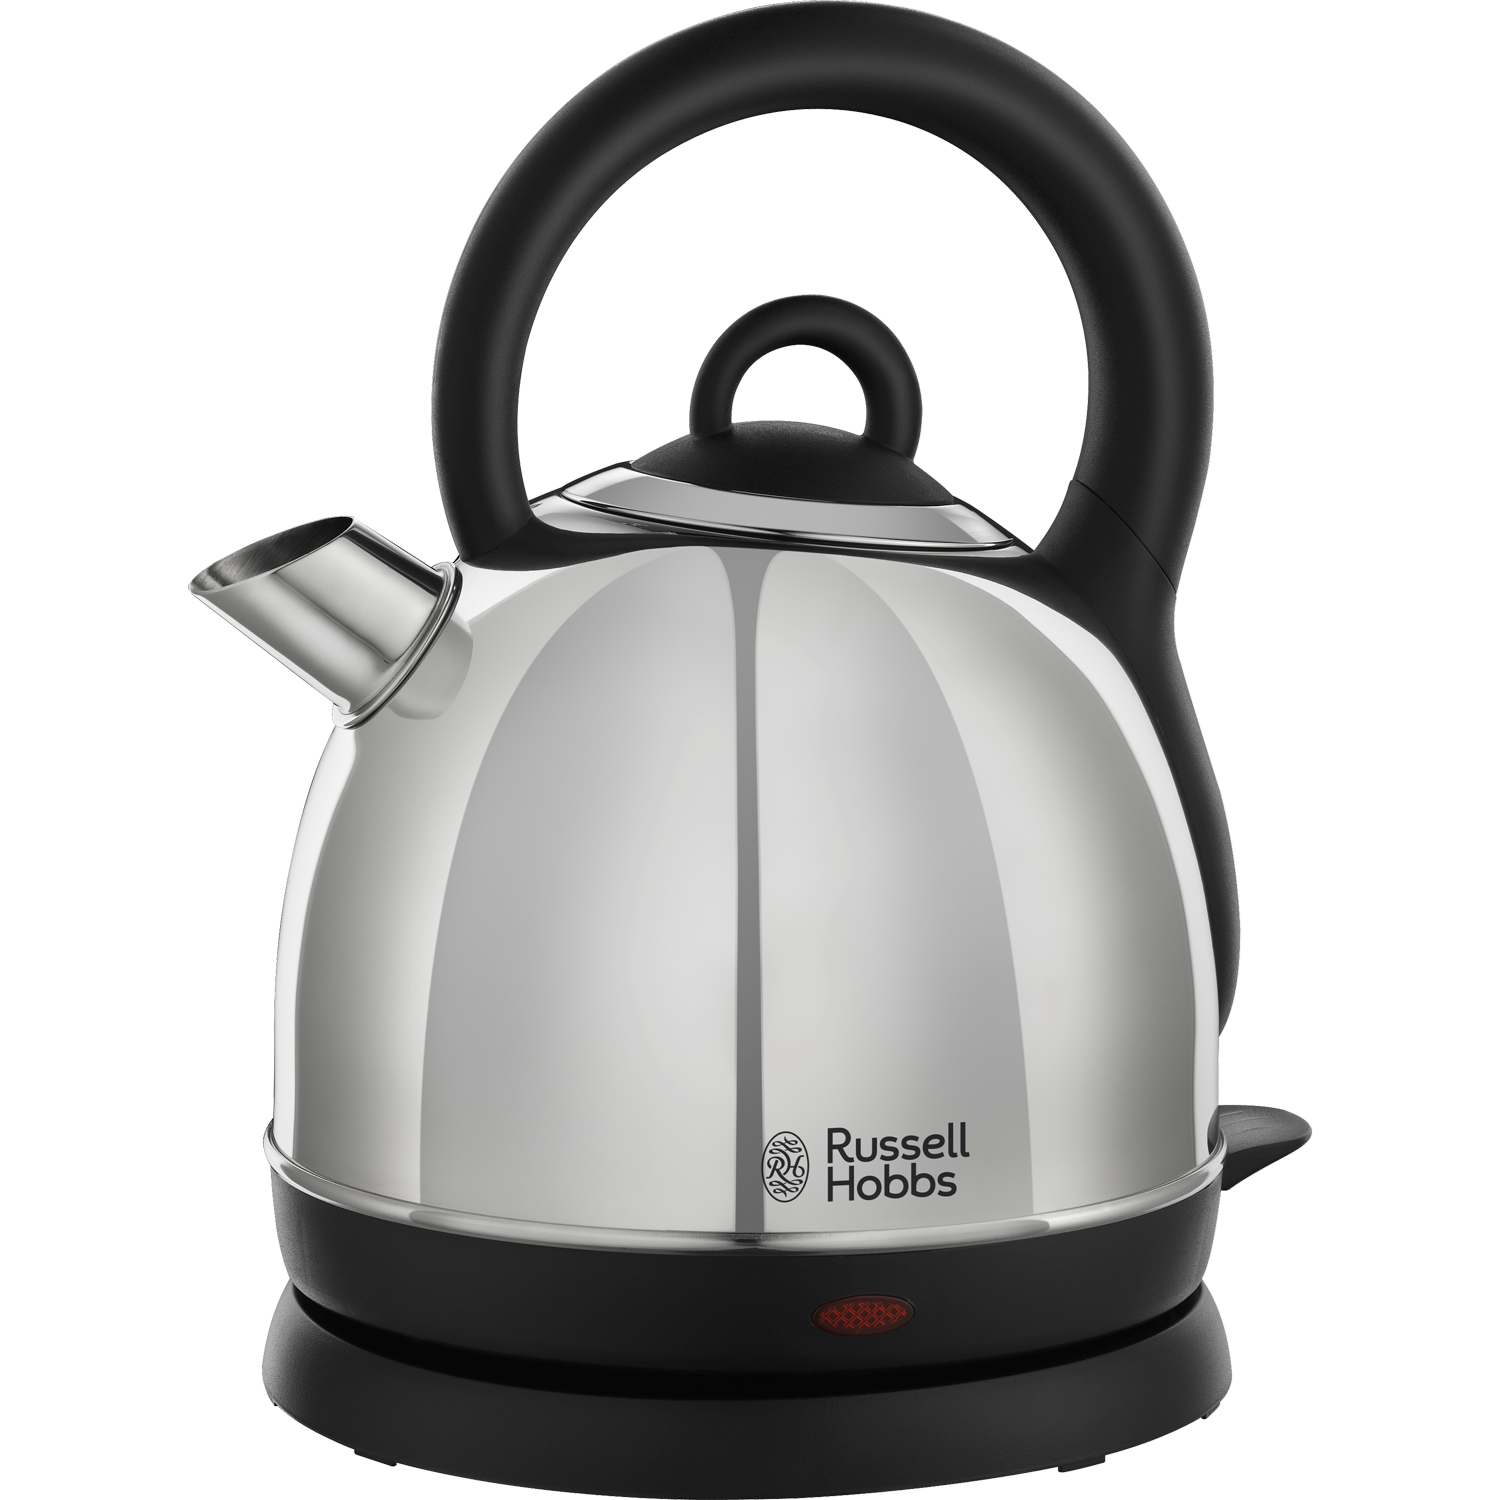 Kettle png images.